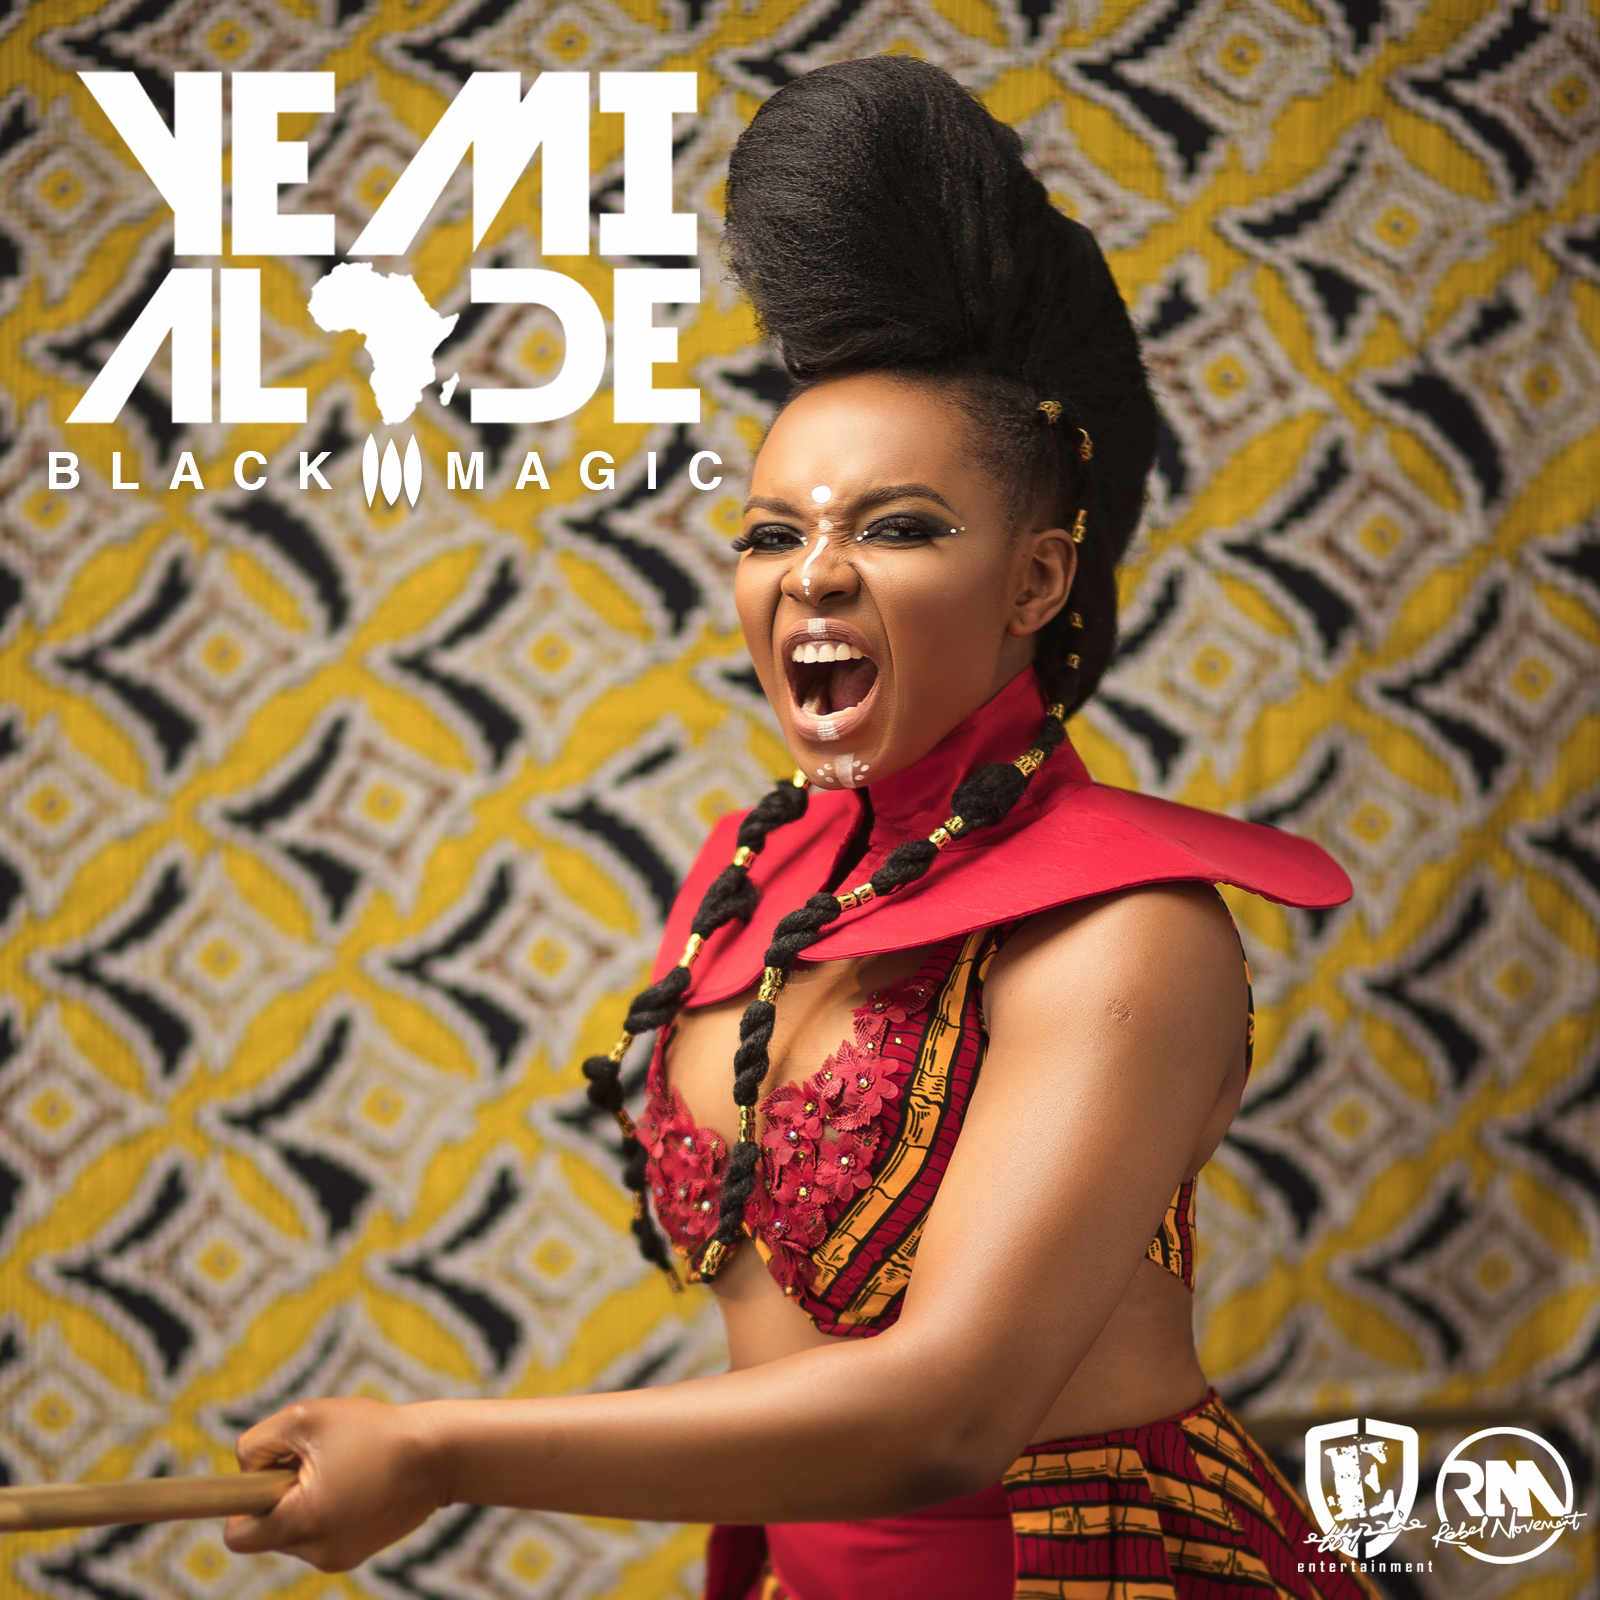 Yemi Alade releases Cover Art & Tracklist for Forthcoming Album "Black Magic"